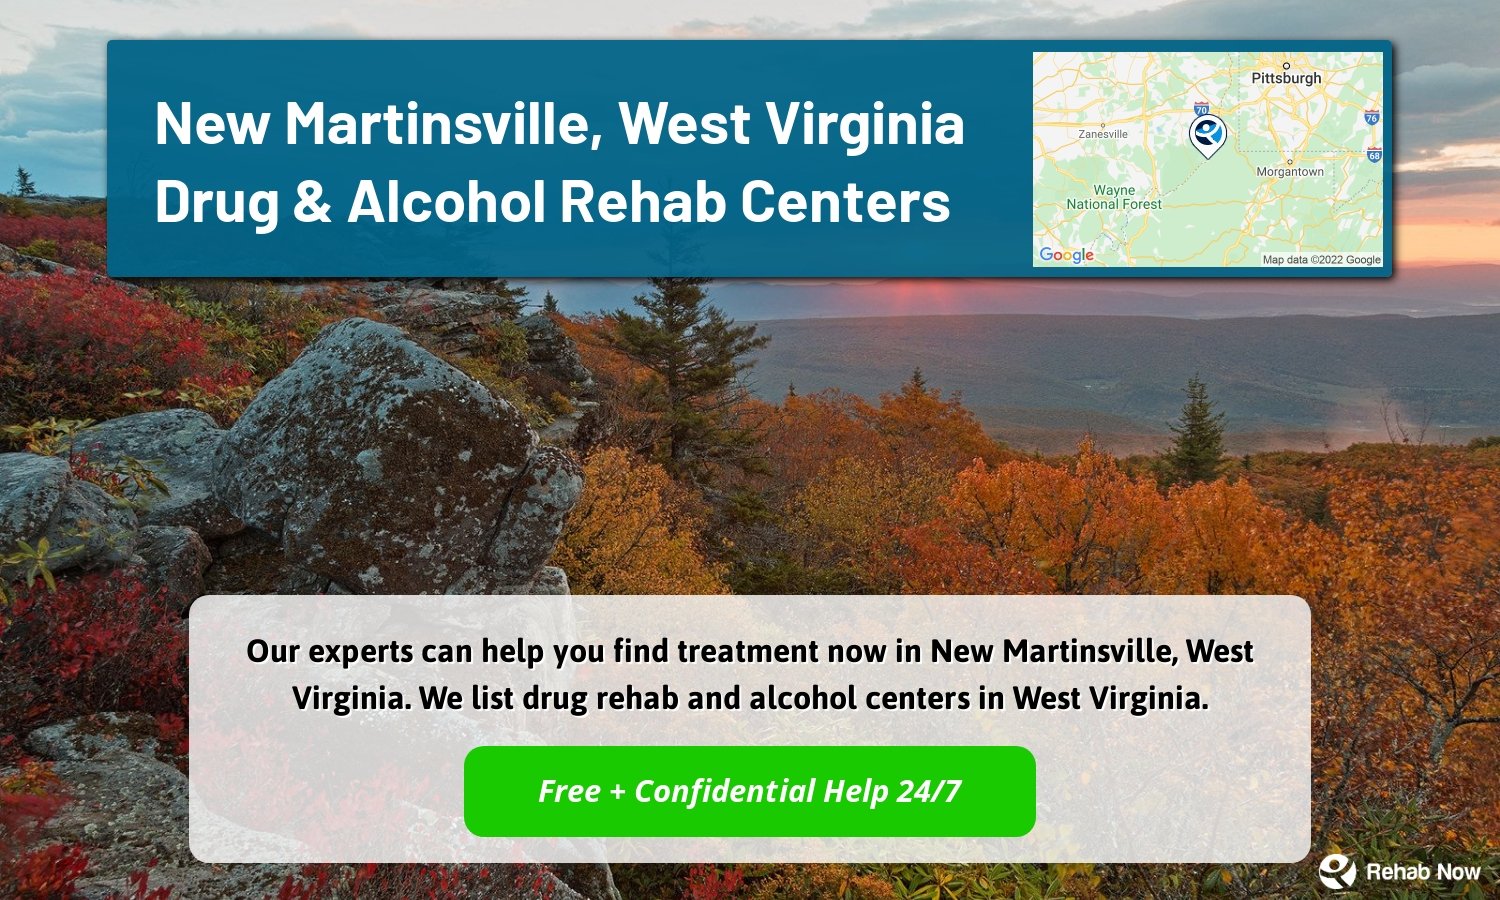 Our experts can help you find treatment now in New Martinsville, West Virginia. We list drug rehab and alcohol centers in West Virginia.